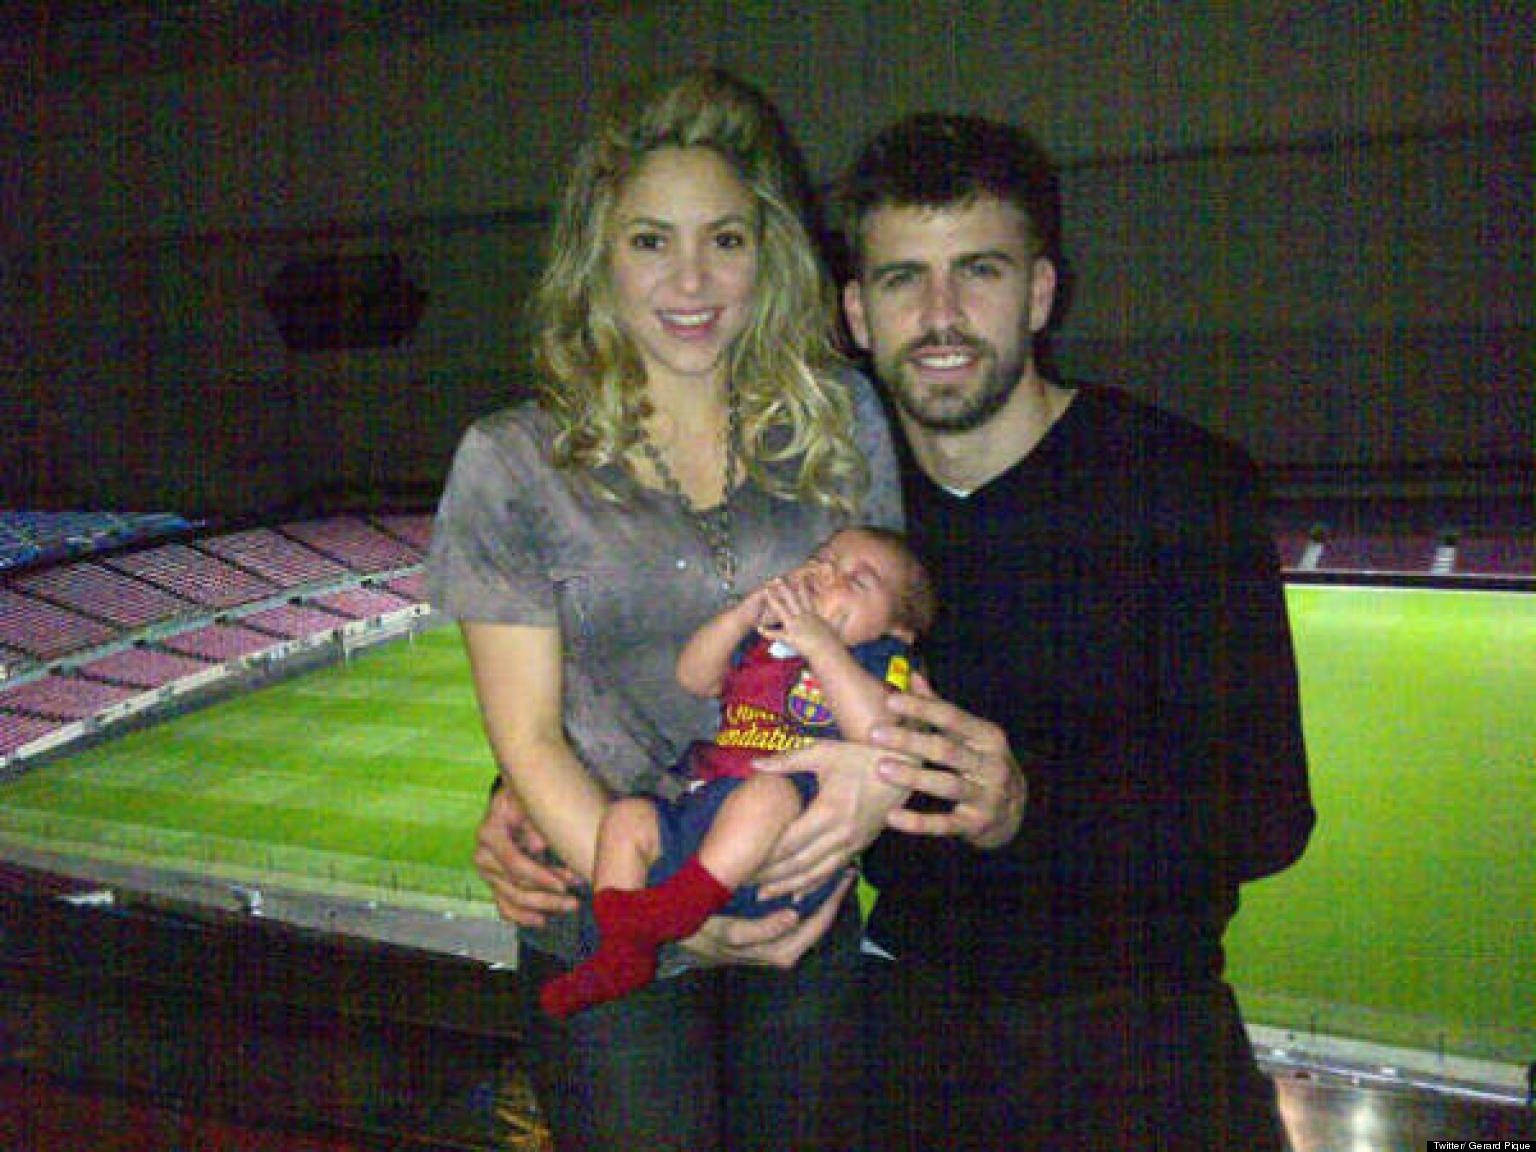 Shakira Pique : The Secrets of Shakira and Gerard Piqué's Private Love ... : Shakira and pro soccer player gerard piqué's love story began with one of her music videos.